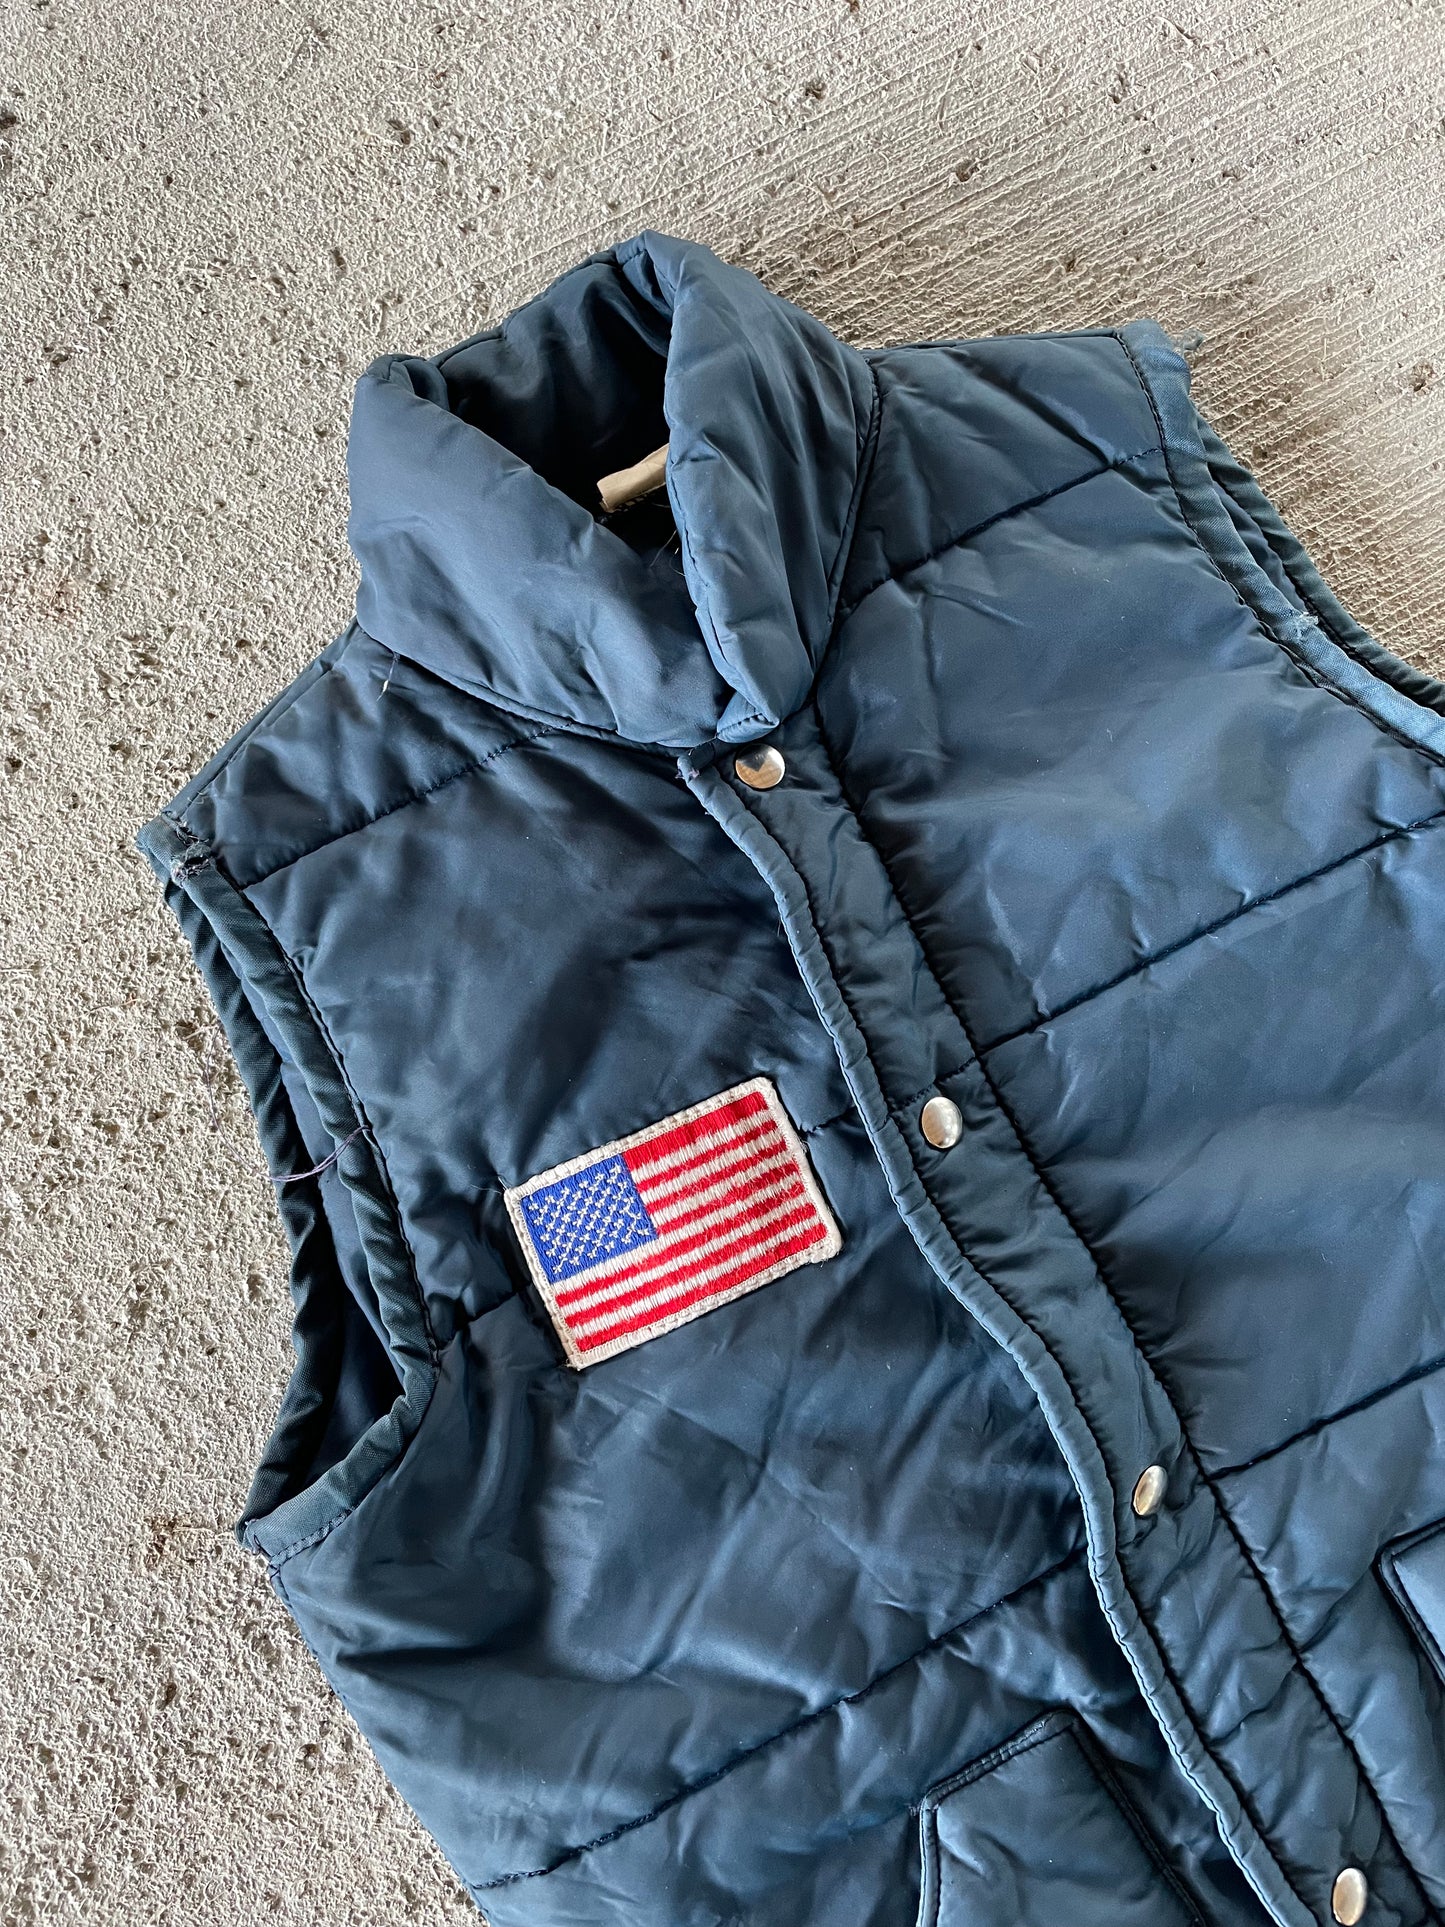 70s Great Lakes Puffer Vest